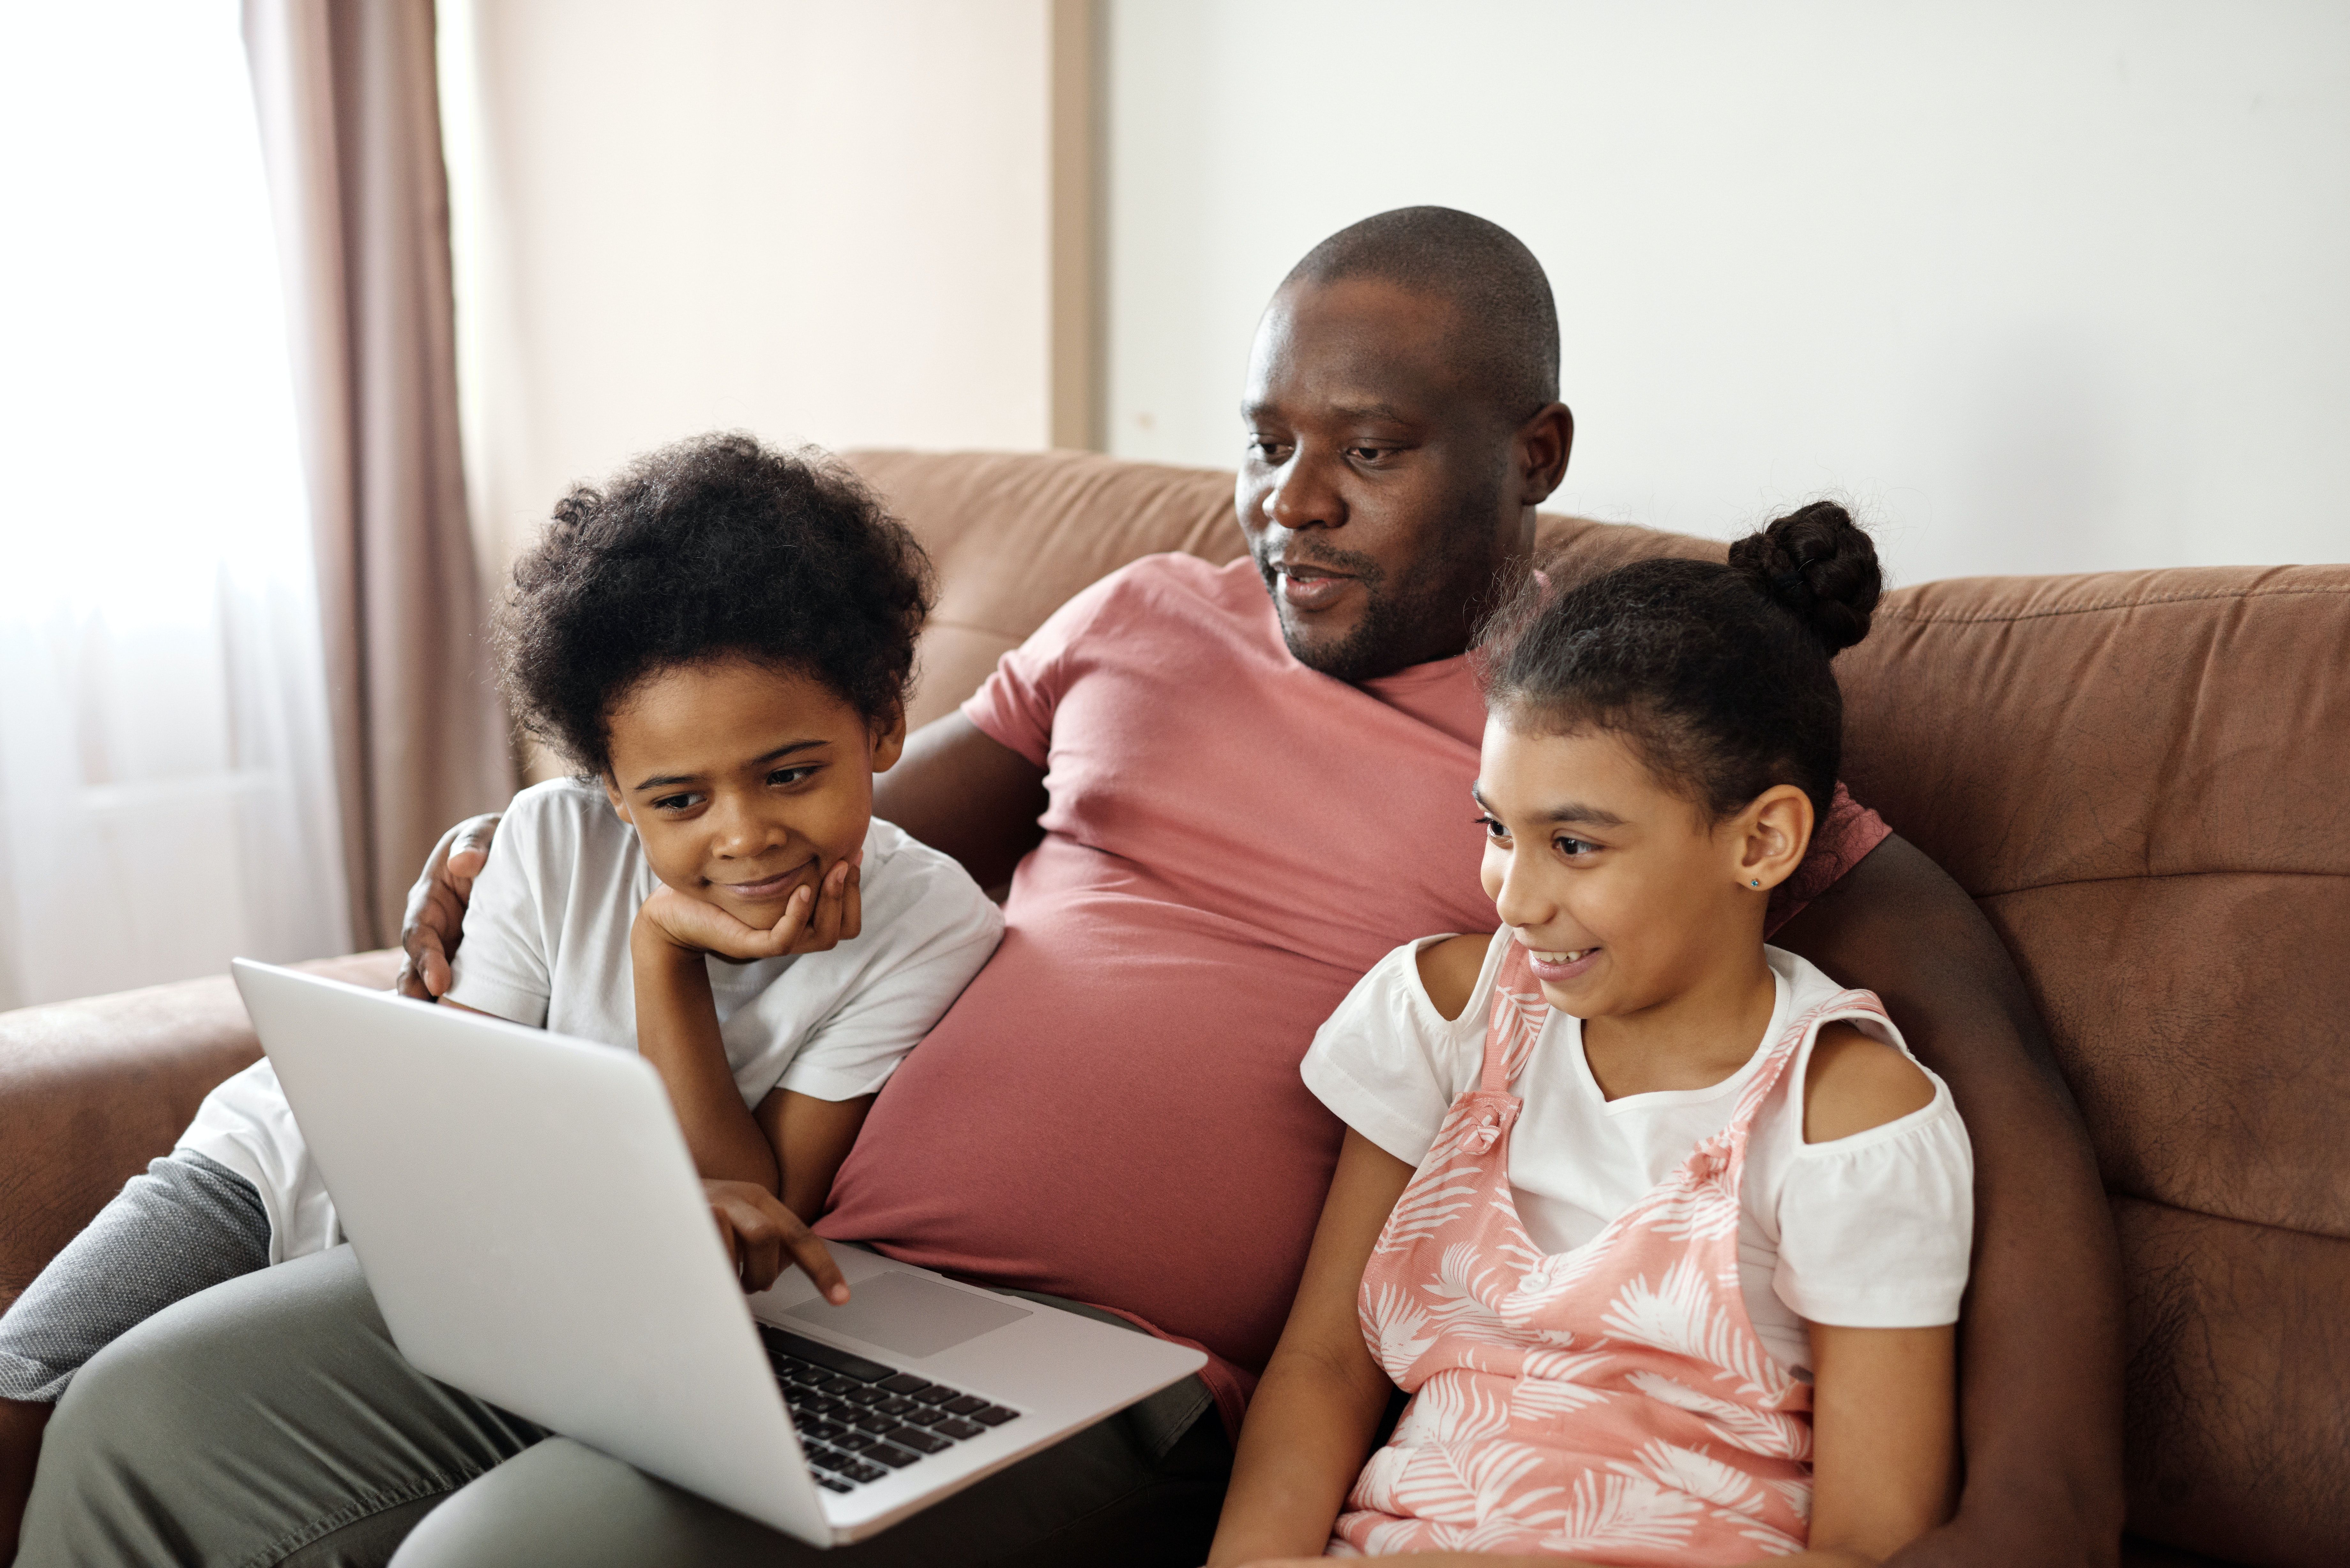 Man with two children watching computer